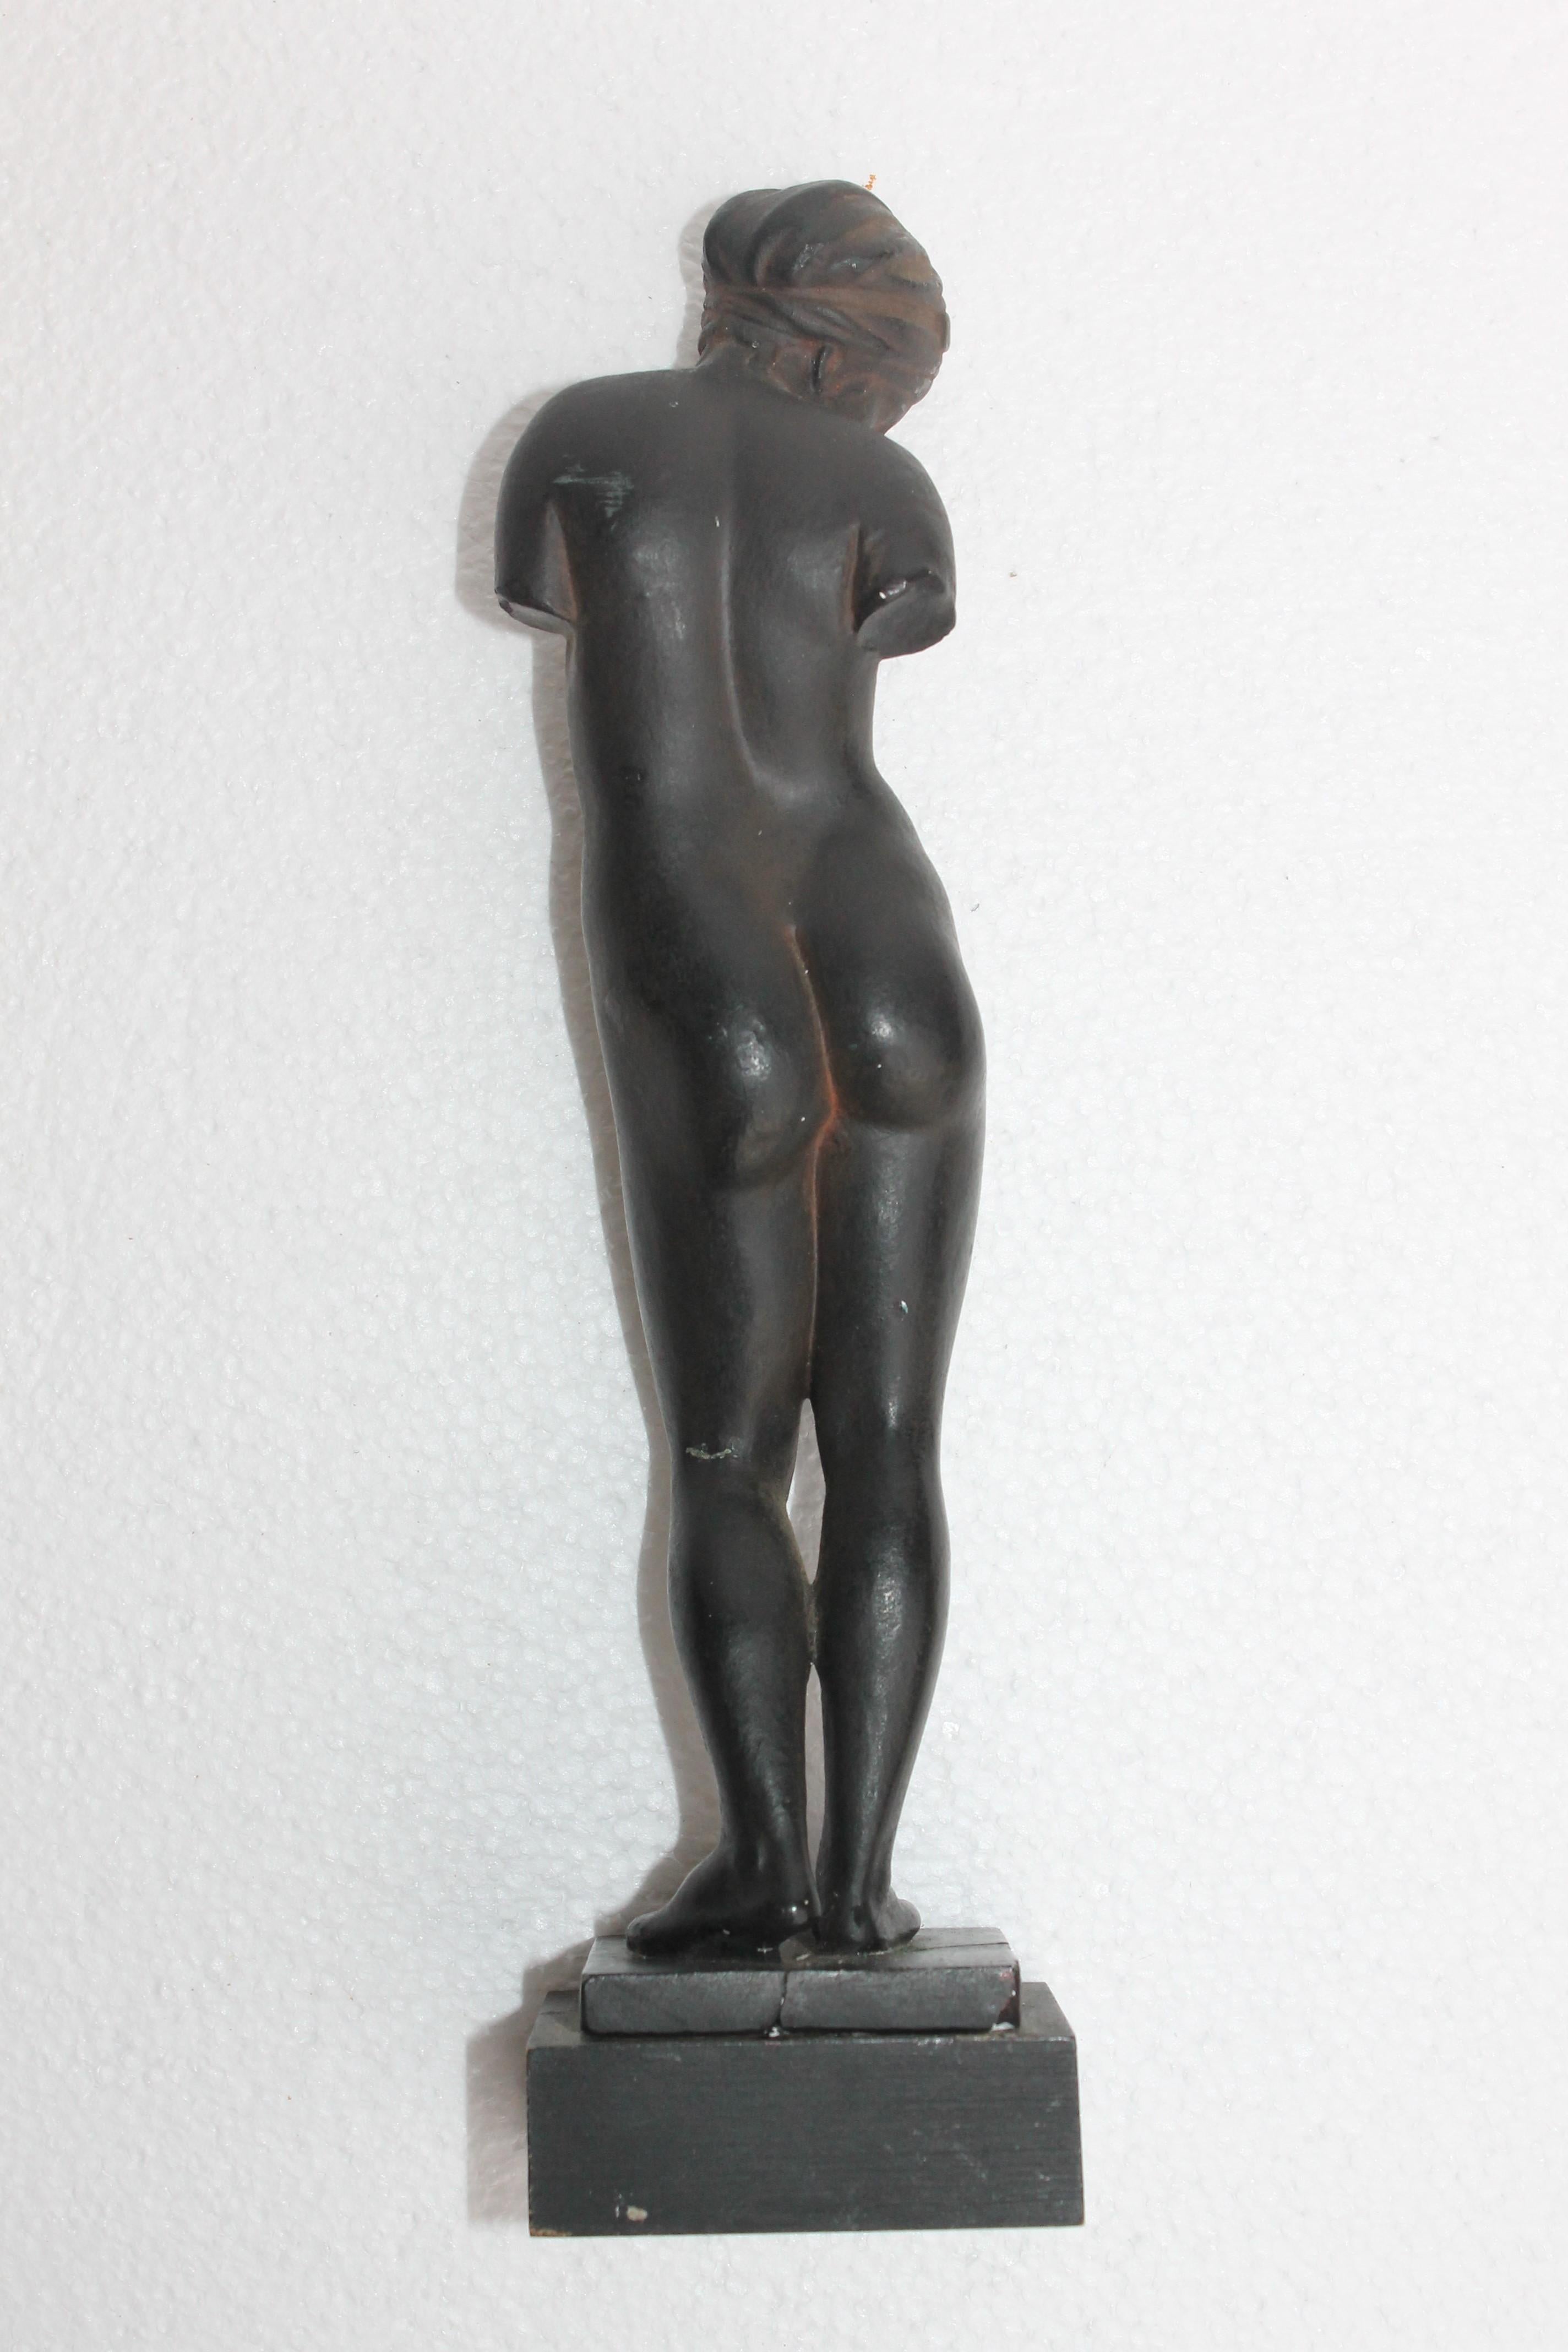 Gypsum statuette representing a classical woman figure.
This statuette was sold in Gipsformerei Museum in Berlin (also known as Staatlich Museen) in 1920s.